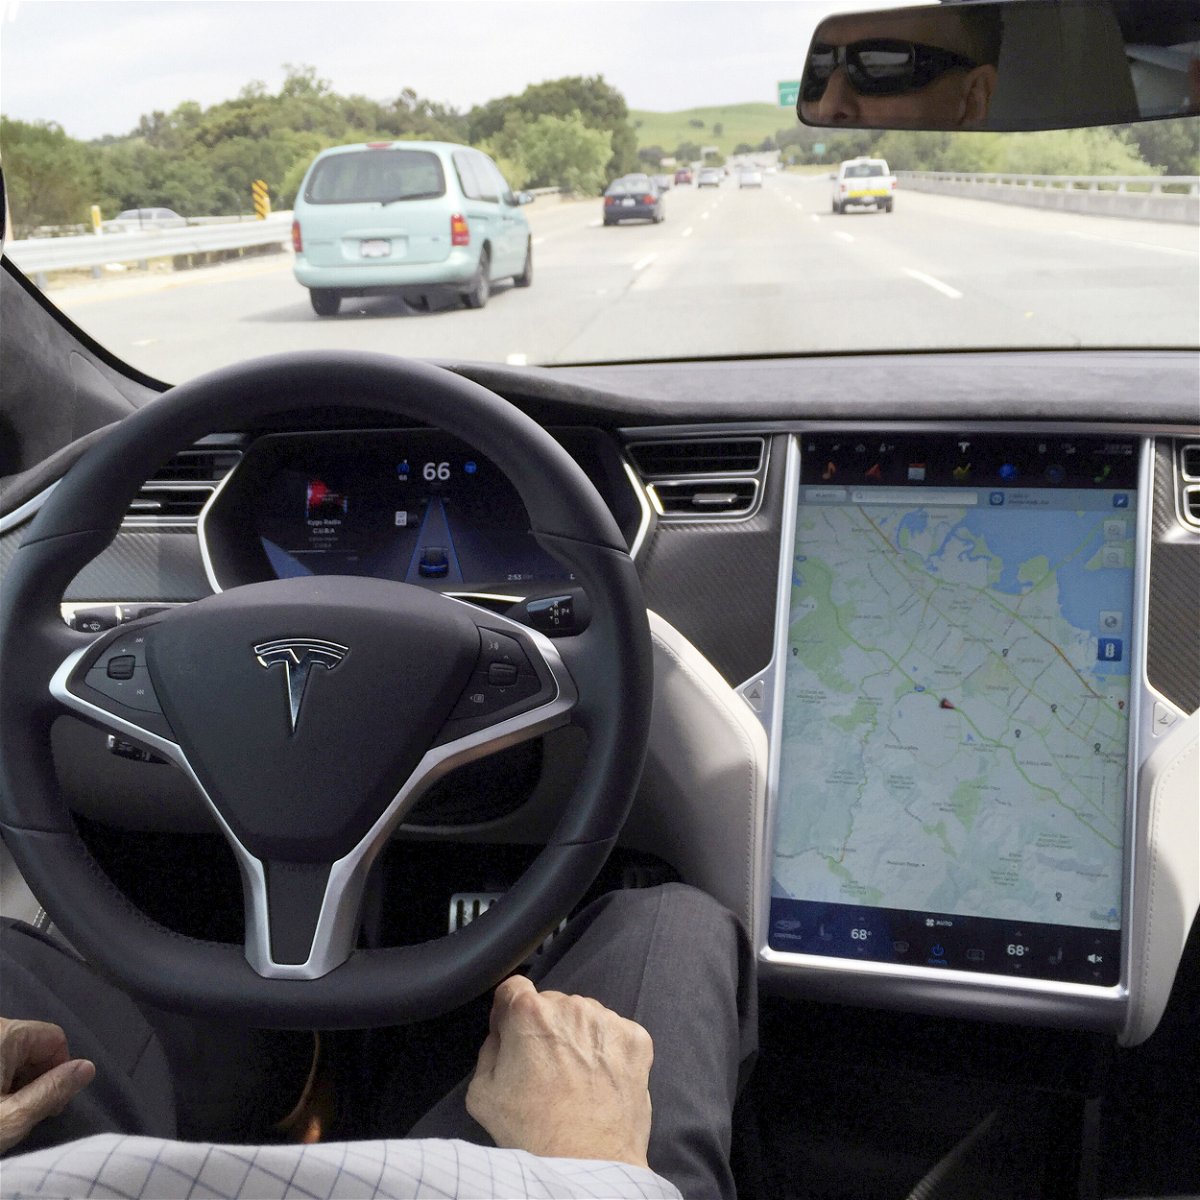 <i>Alexandria Sage/Reuters</i><br/>A Tesla Model S with Autopilot is shown. The Insurance Institute for Highway Safety warns drivers about putting too much trust in their vehicles' driver-assist features.